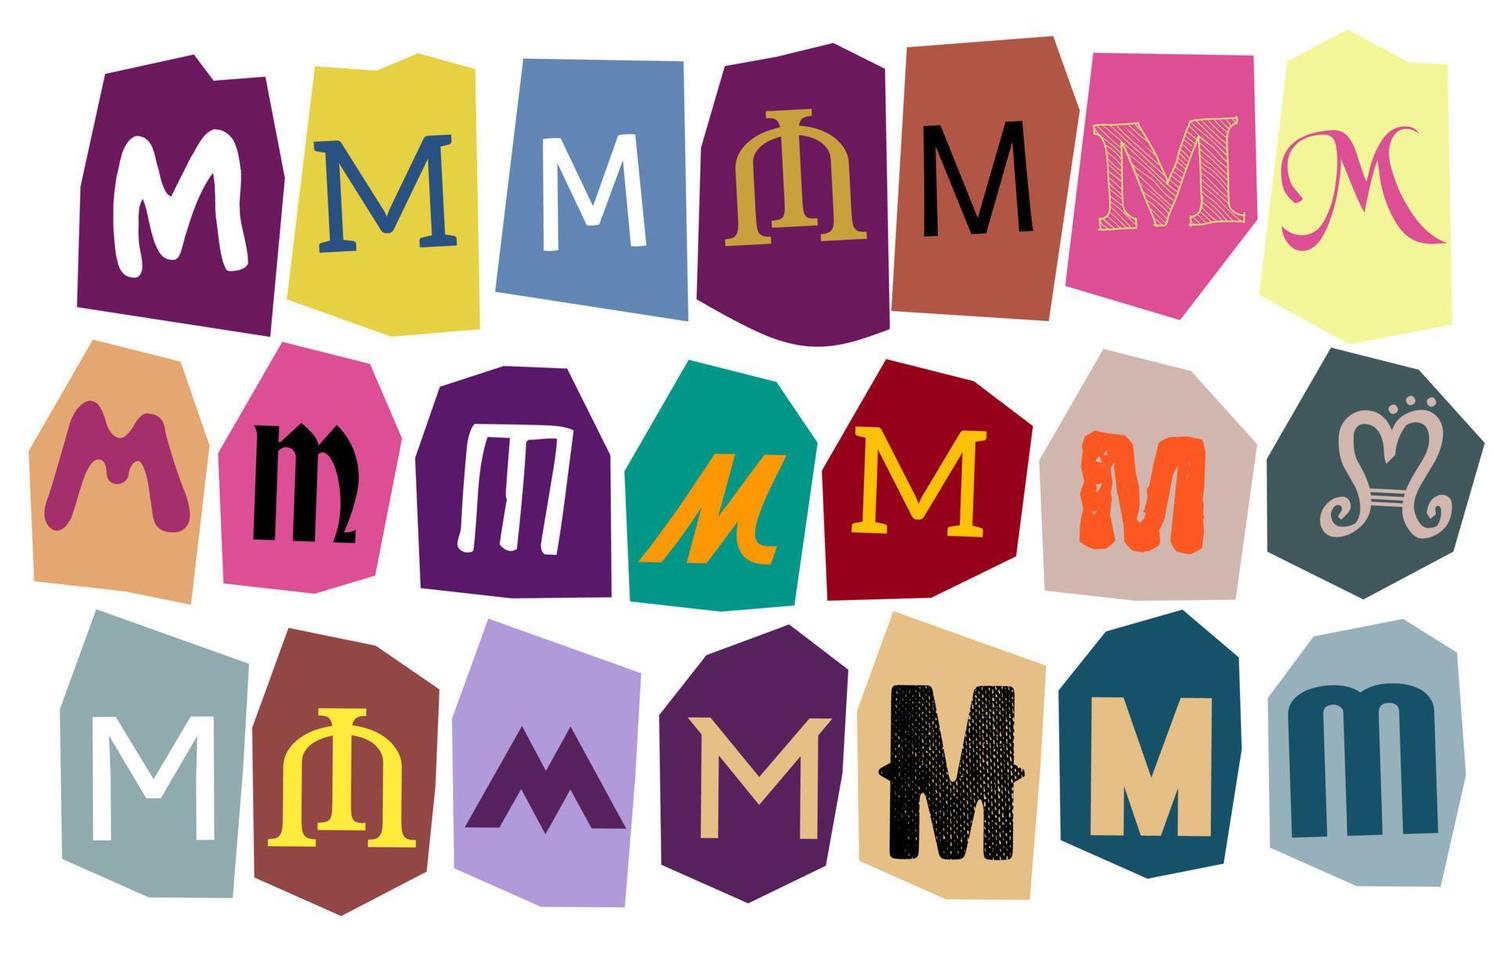 Alphabet M- vector cut newspaper and magazine letters, paper style ransom note letter